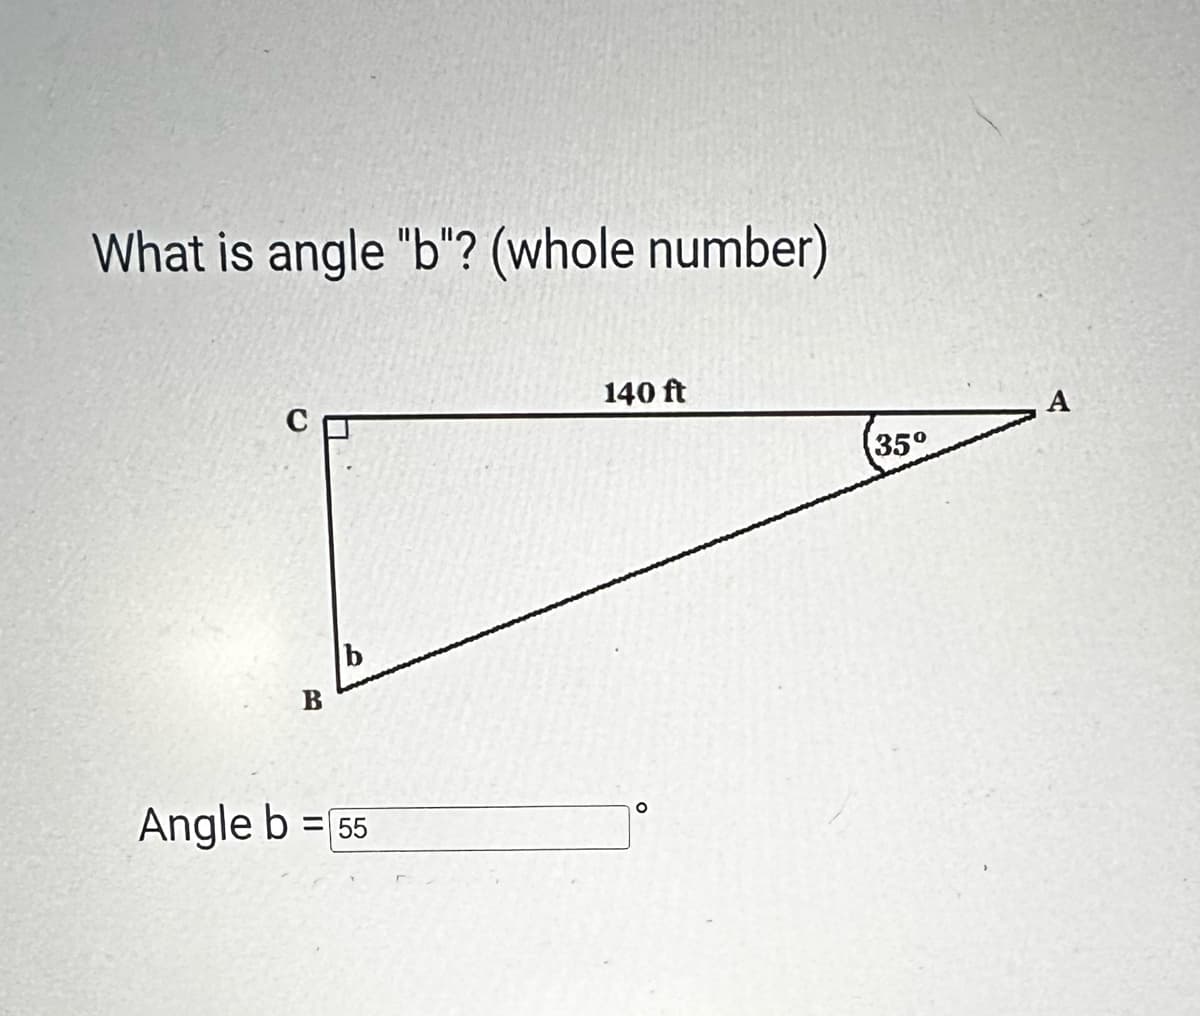 What is angle "b"? (whole number)
B
Angle b = 55
140 ft
°
A
35°